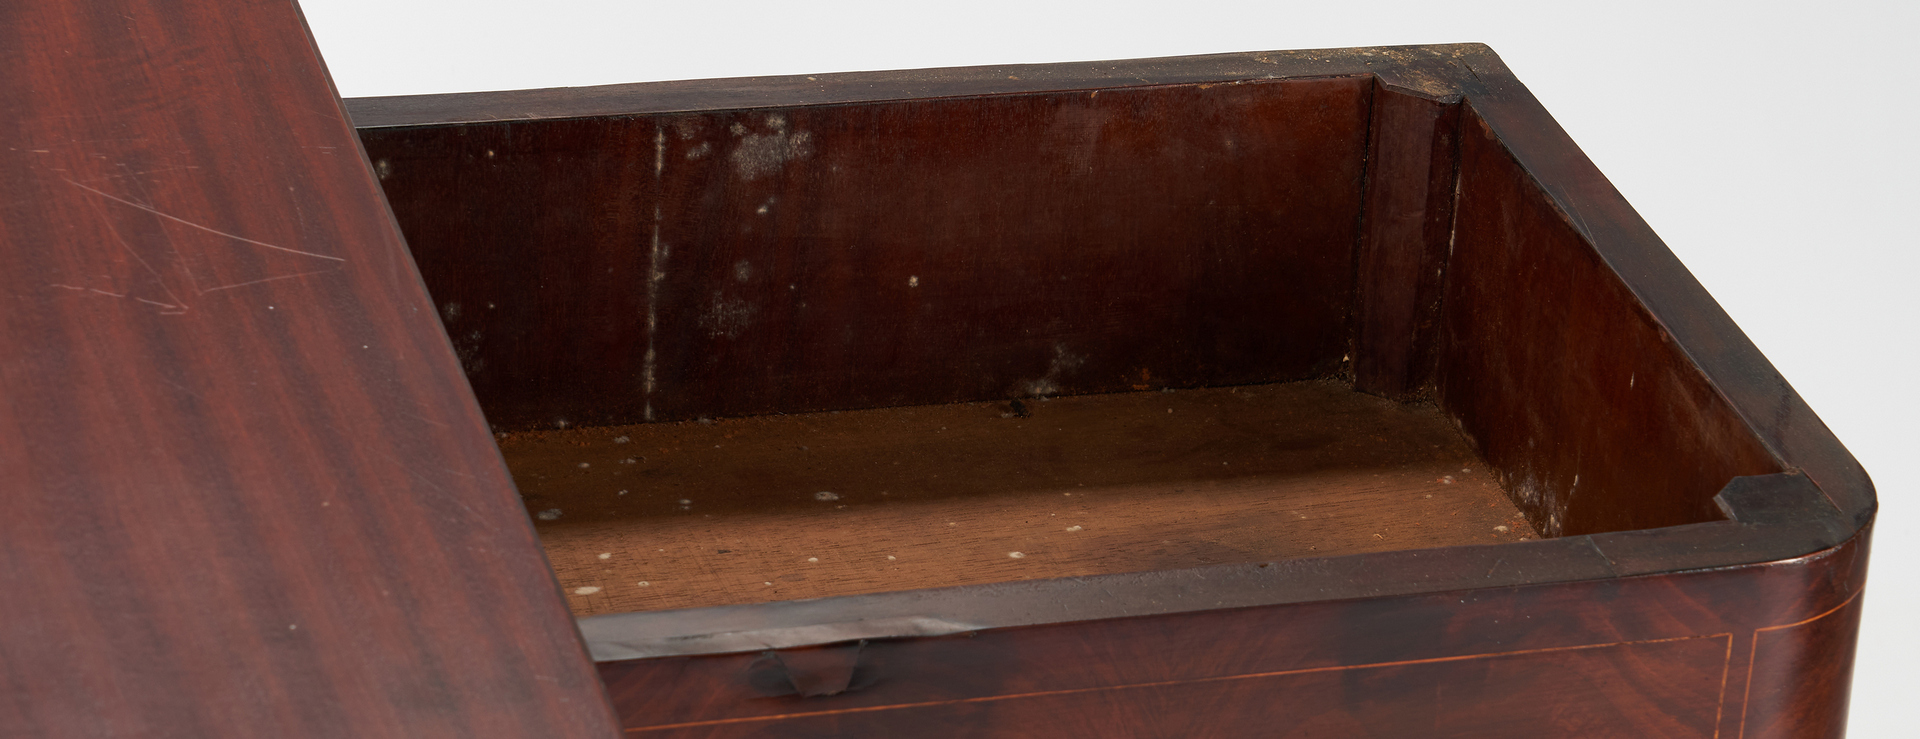 Lot 422: Massachusetts Federal Inlaid Game Table